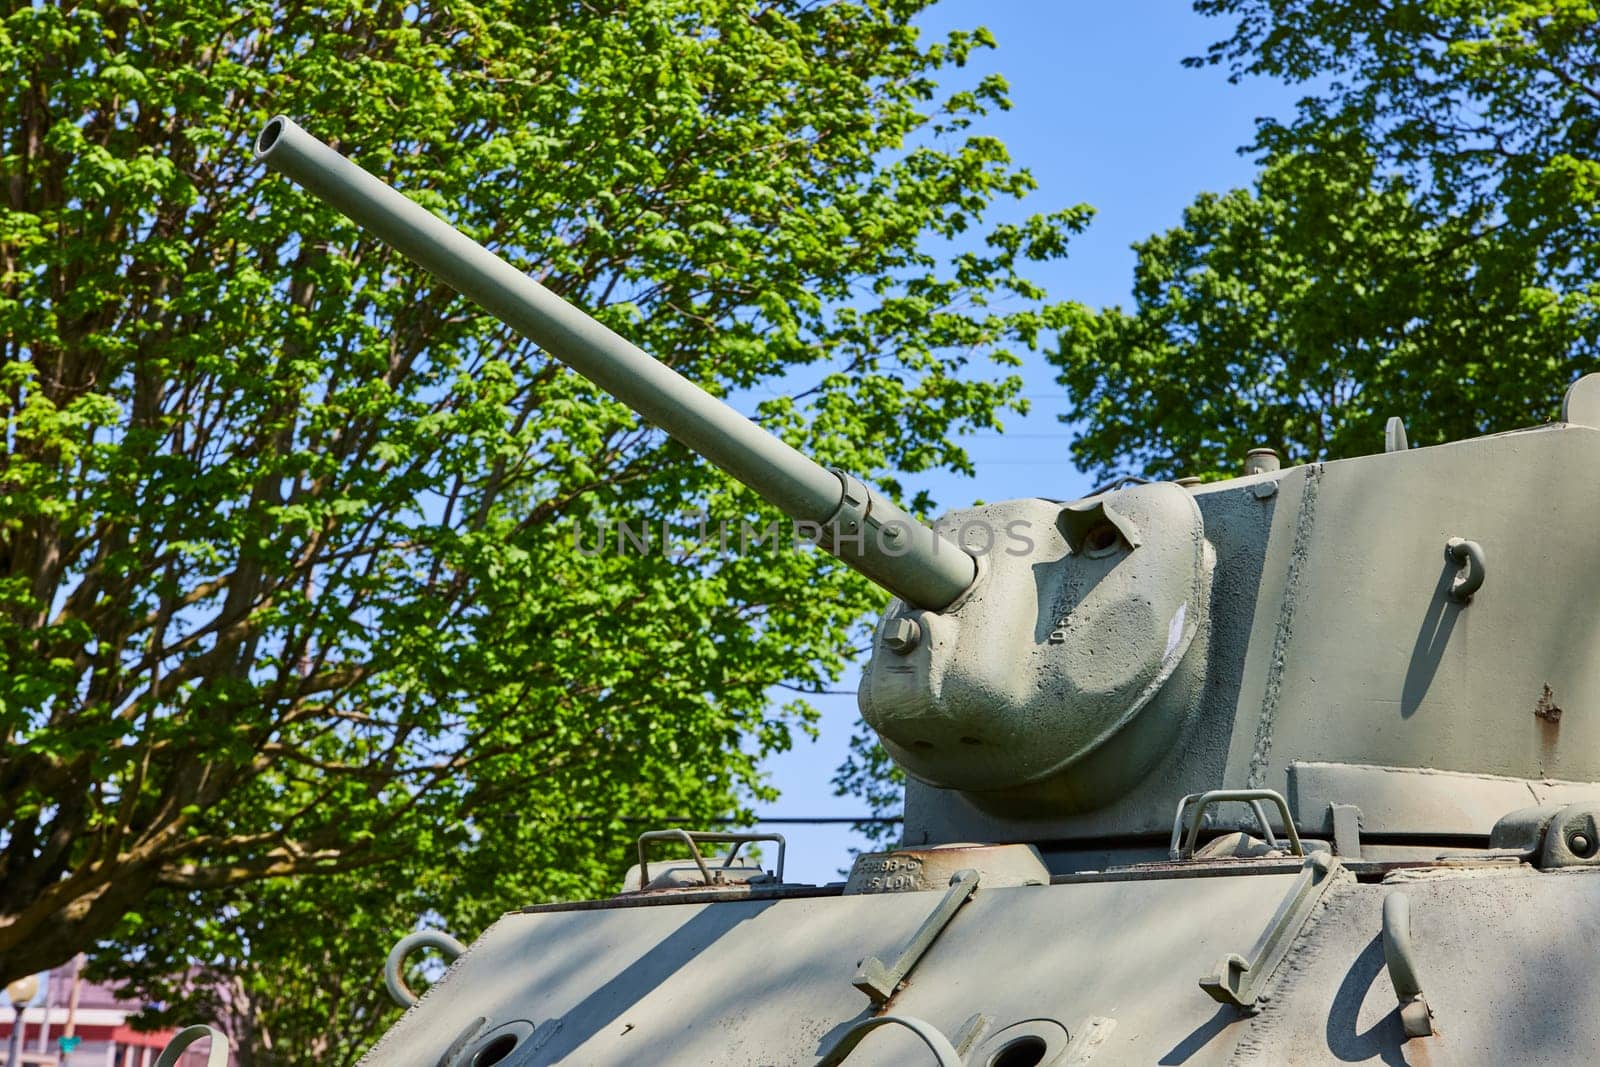 Aged military tank in Warsaw, Indiana, stands among lush greenery, symbolizing peace and history.